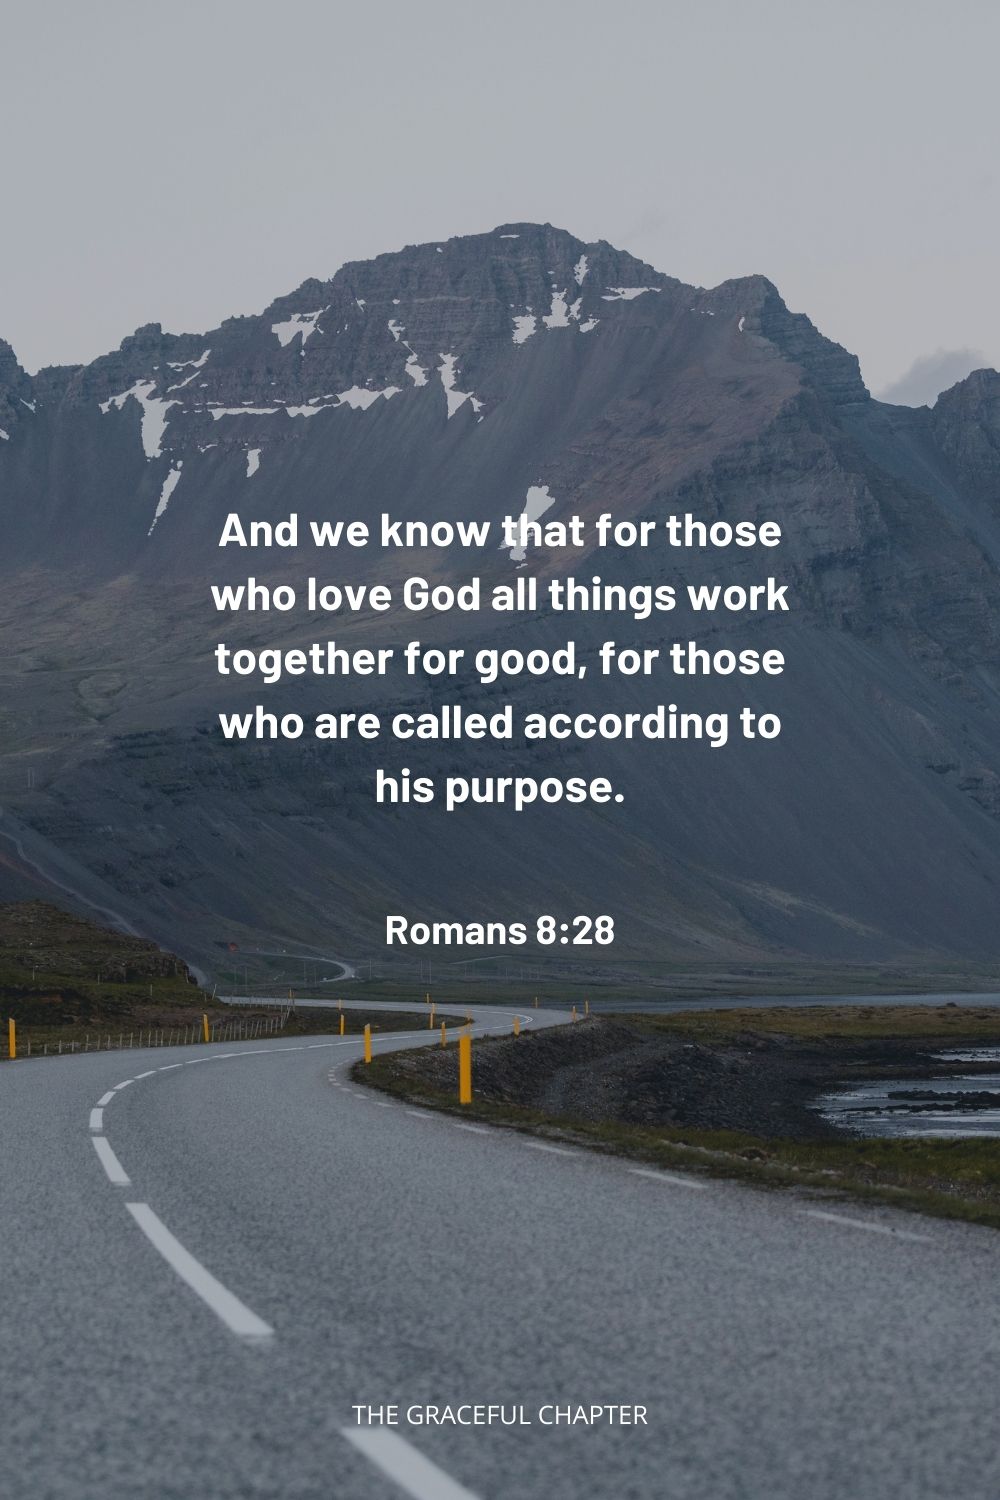 And we know that for those who love God all things work together for good, for those who are called according to his purpose. Romans 8:28